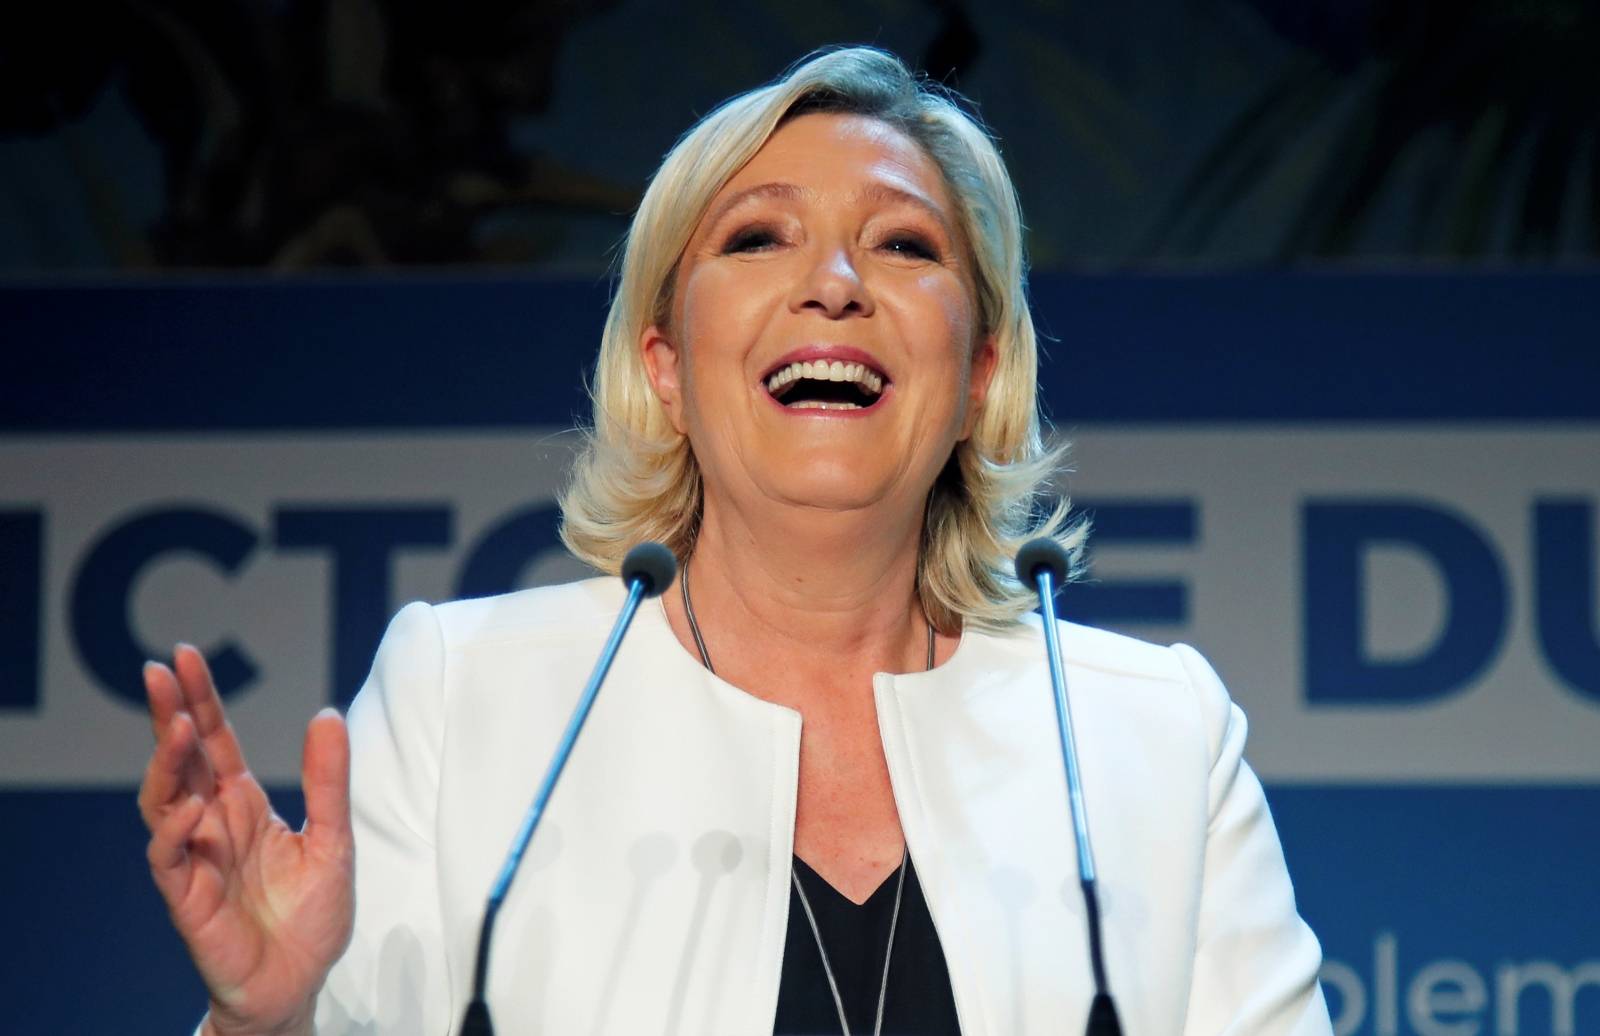 French far-right National Rally (Rassemblement National) party leader Marine Le Pen reacts after the first results in Paris